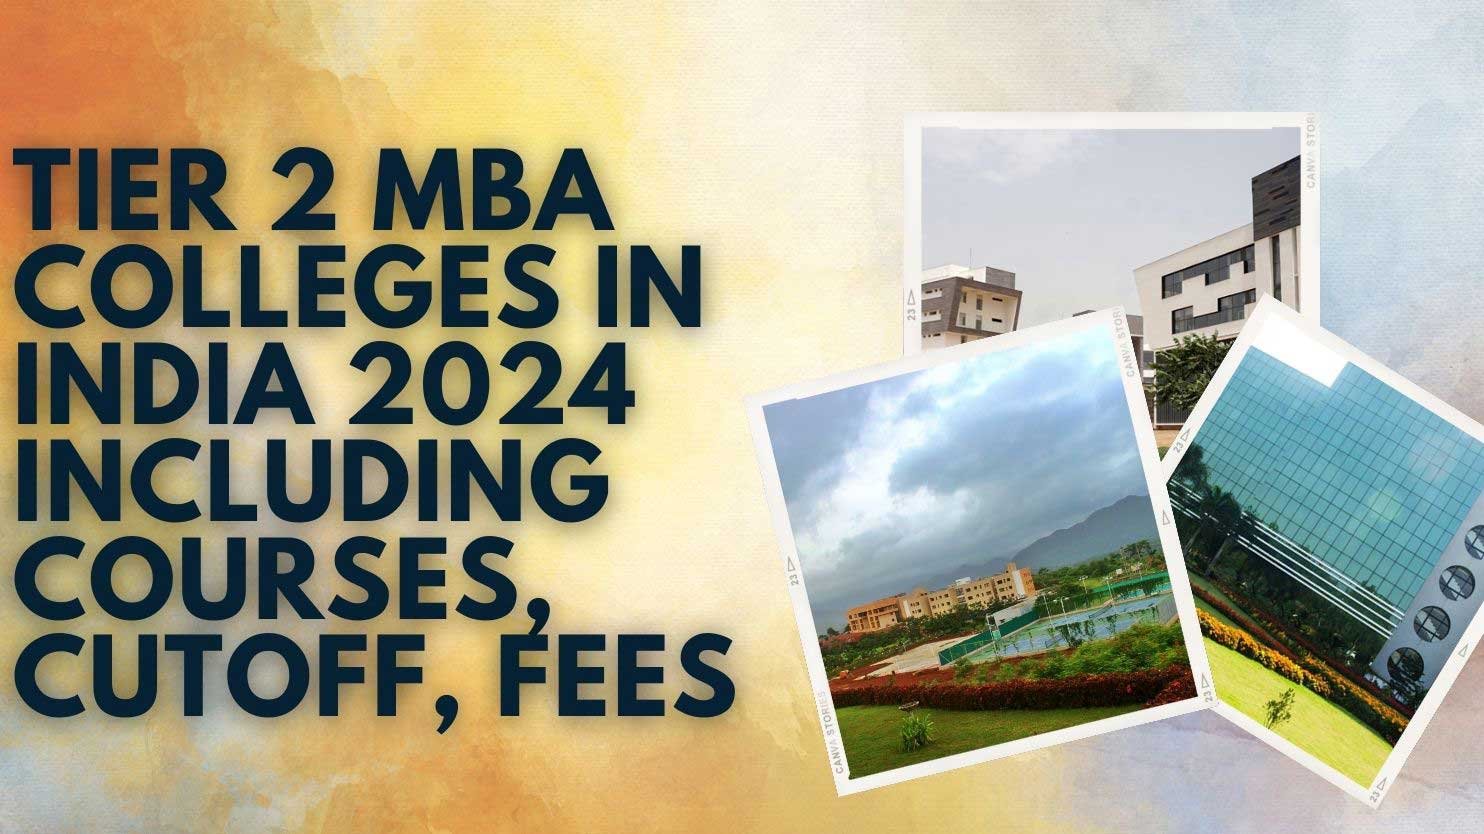 Tier 2 MBA Colleges in India 2024 Including Courses, Cutoff, Fees